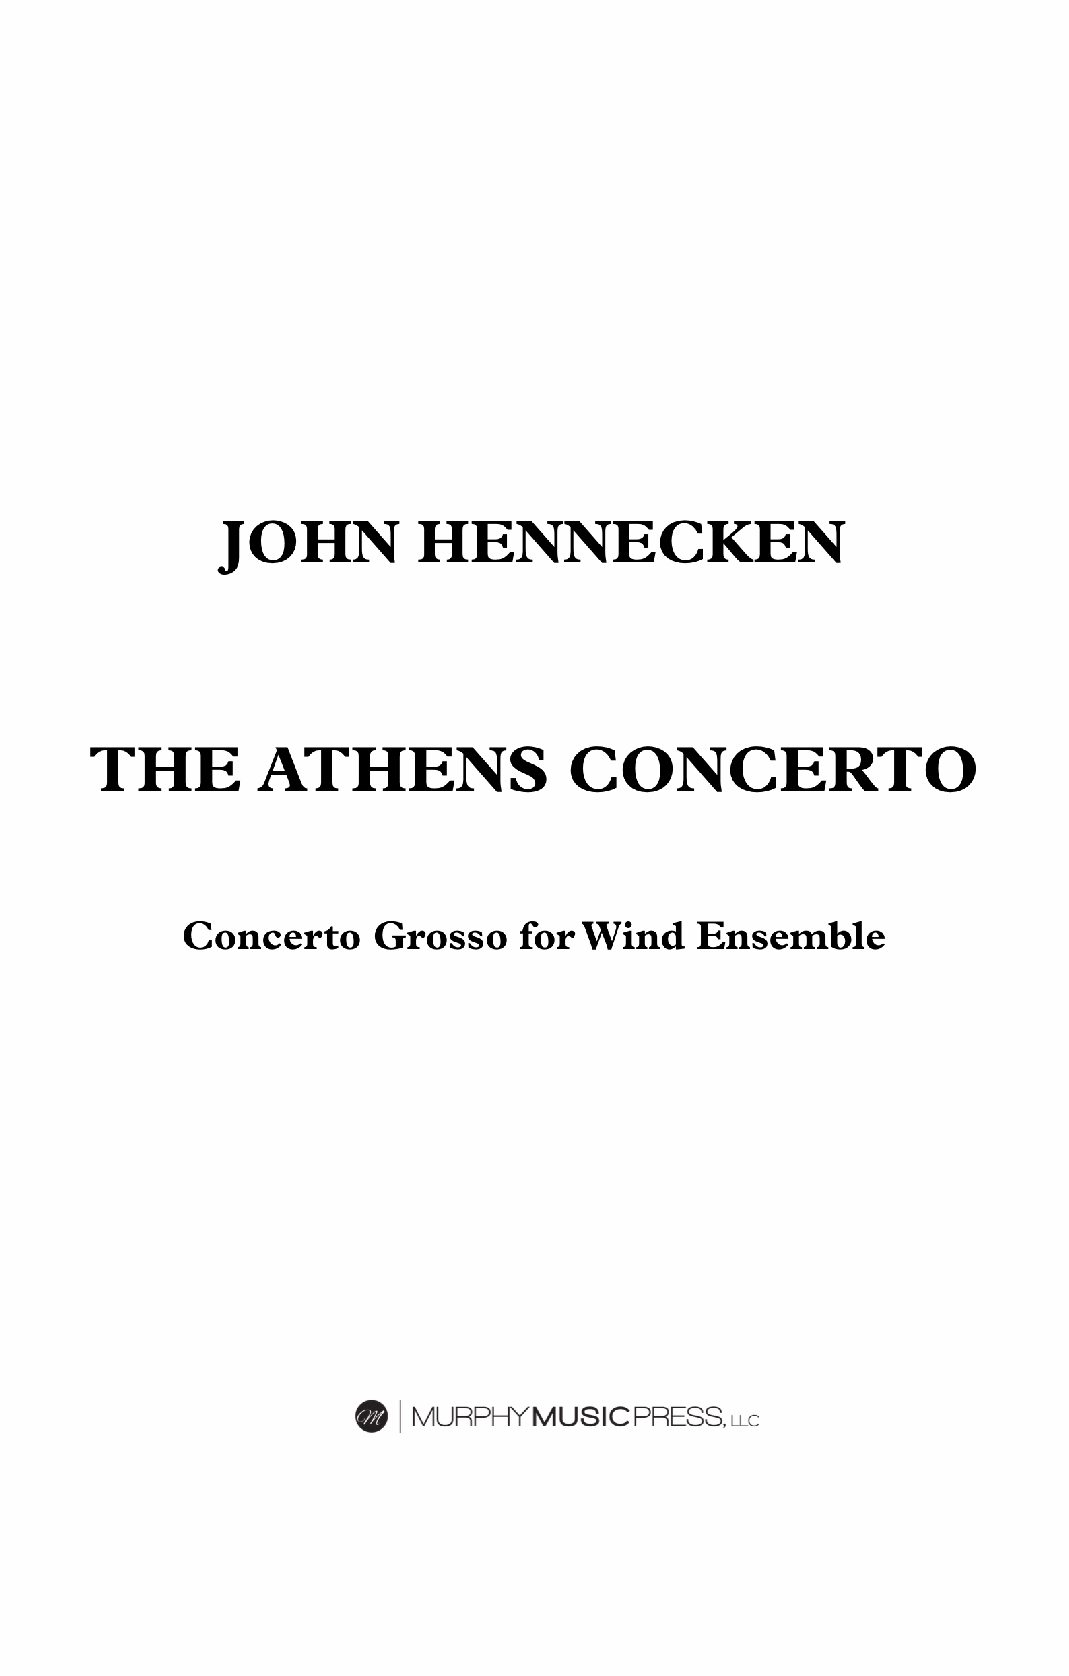 The Athens Concerto by John Hennecken